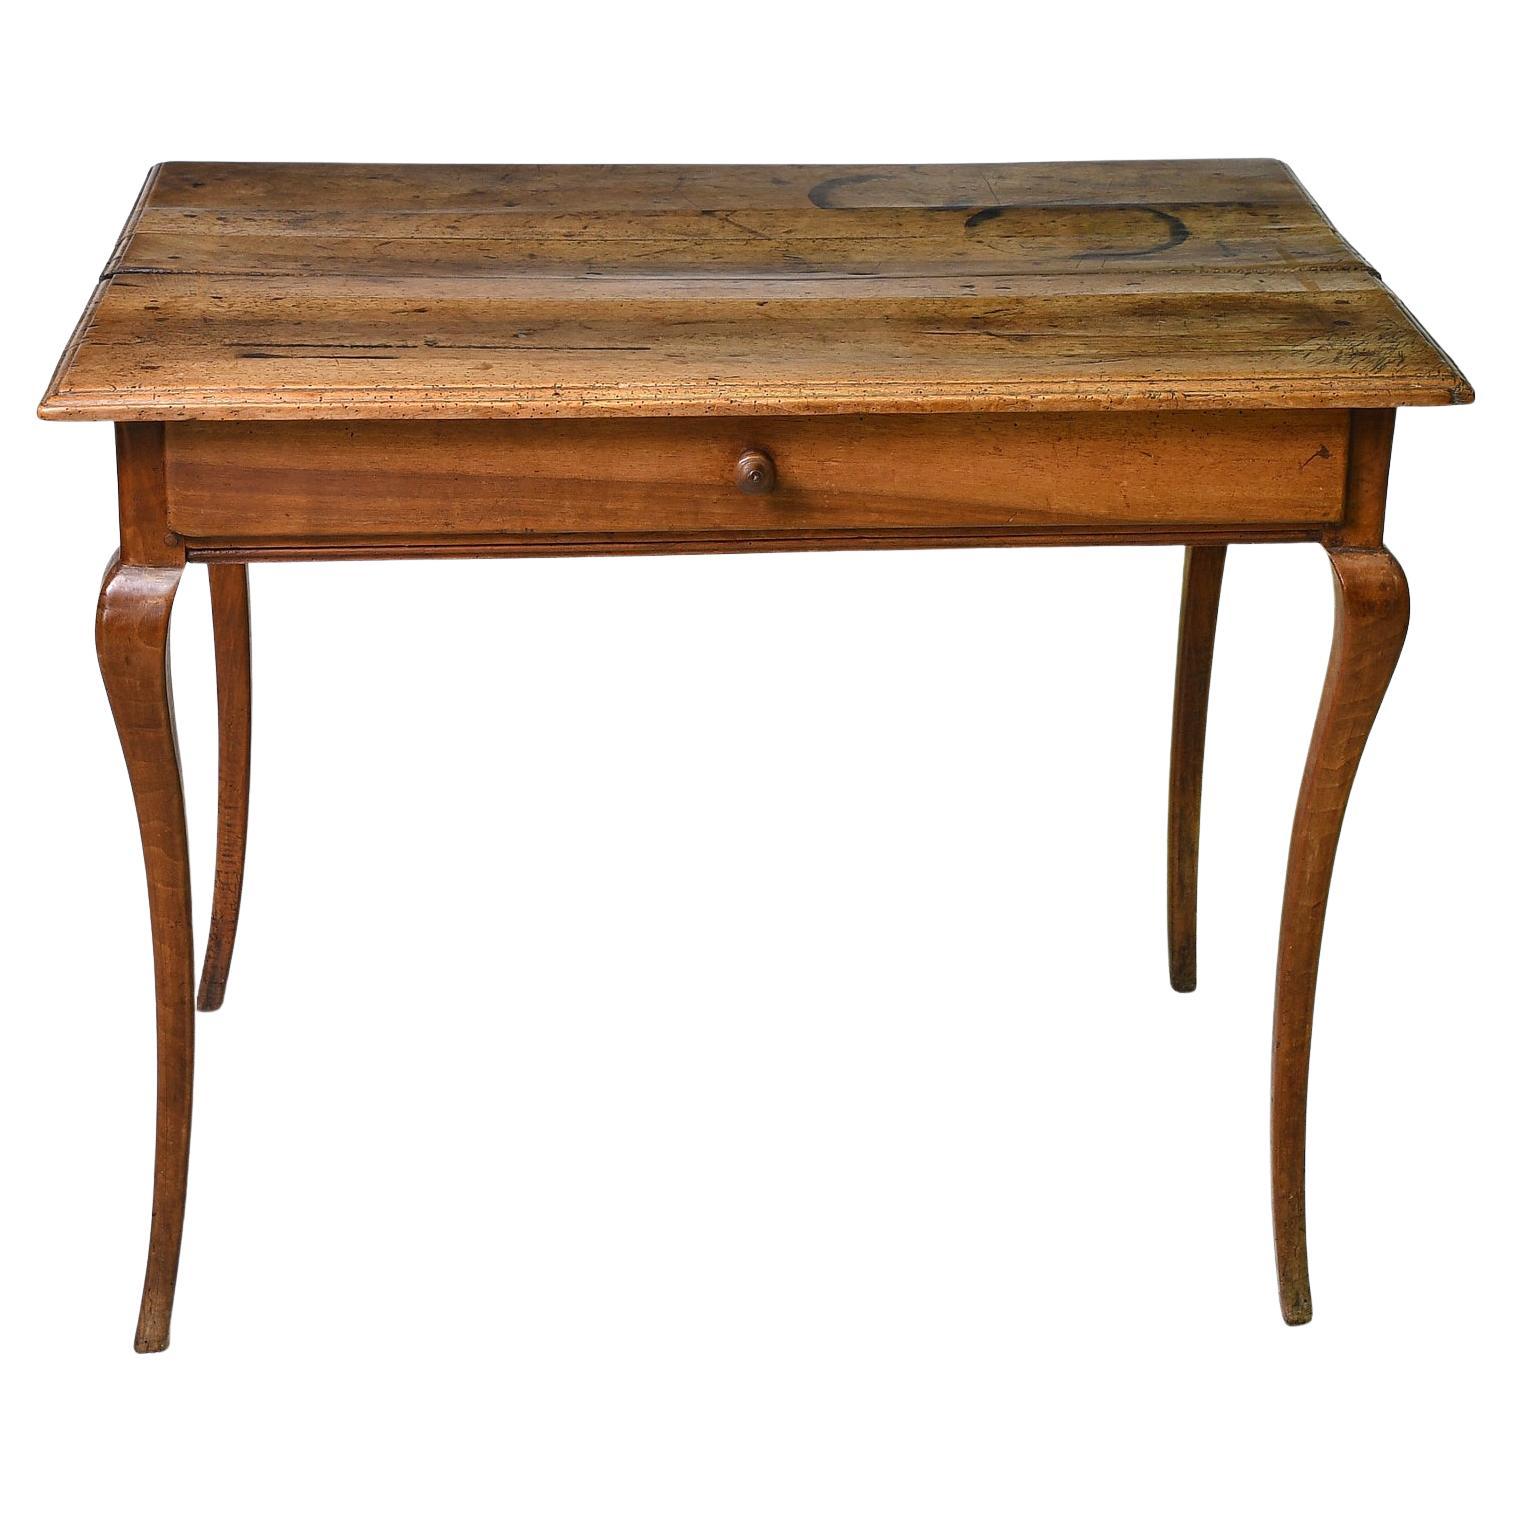 French Provincial Cherry Writing Table or Bedside Table with Drawer, circa 1800 For Sale